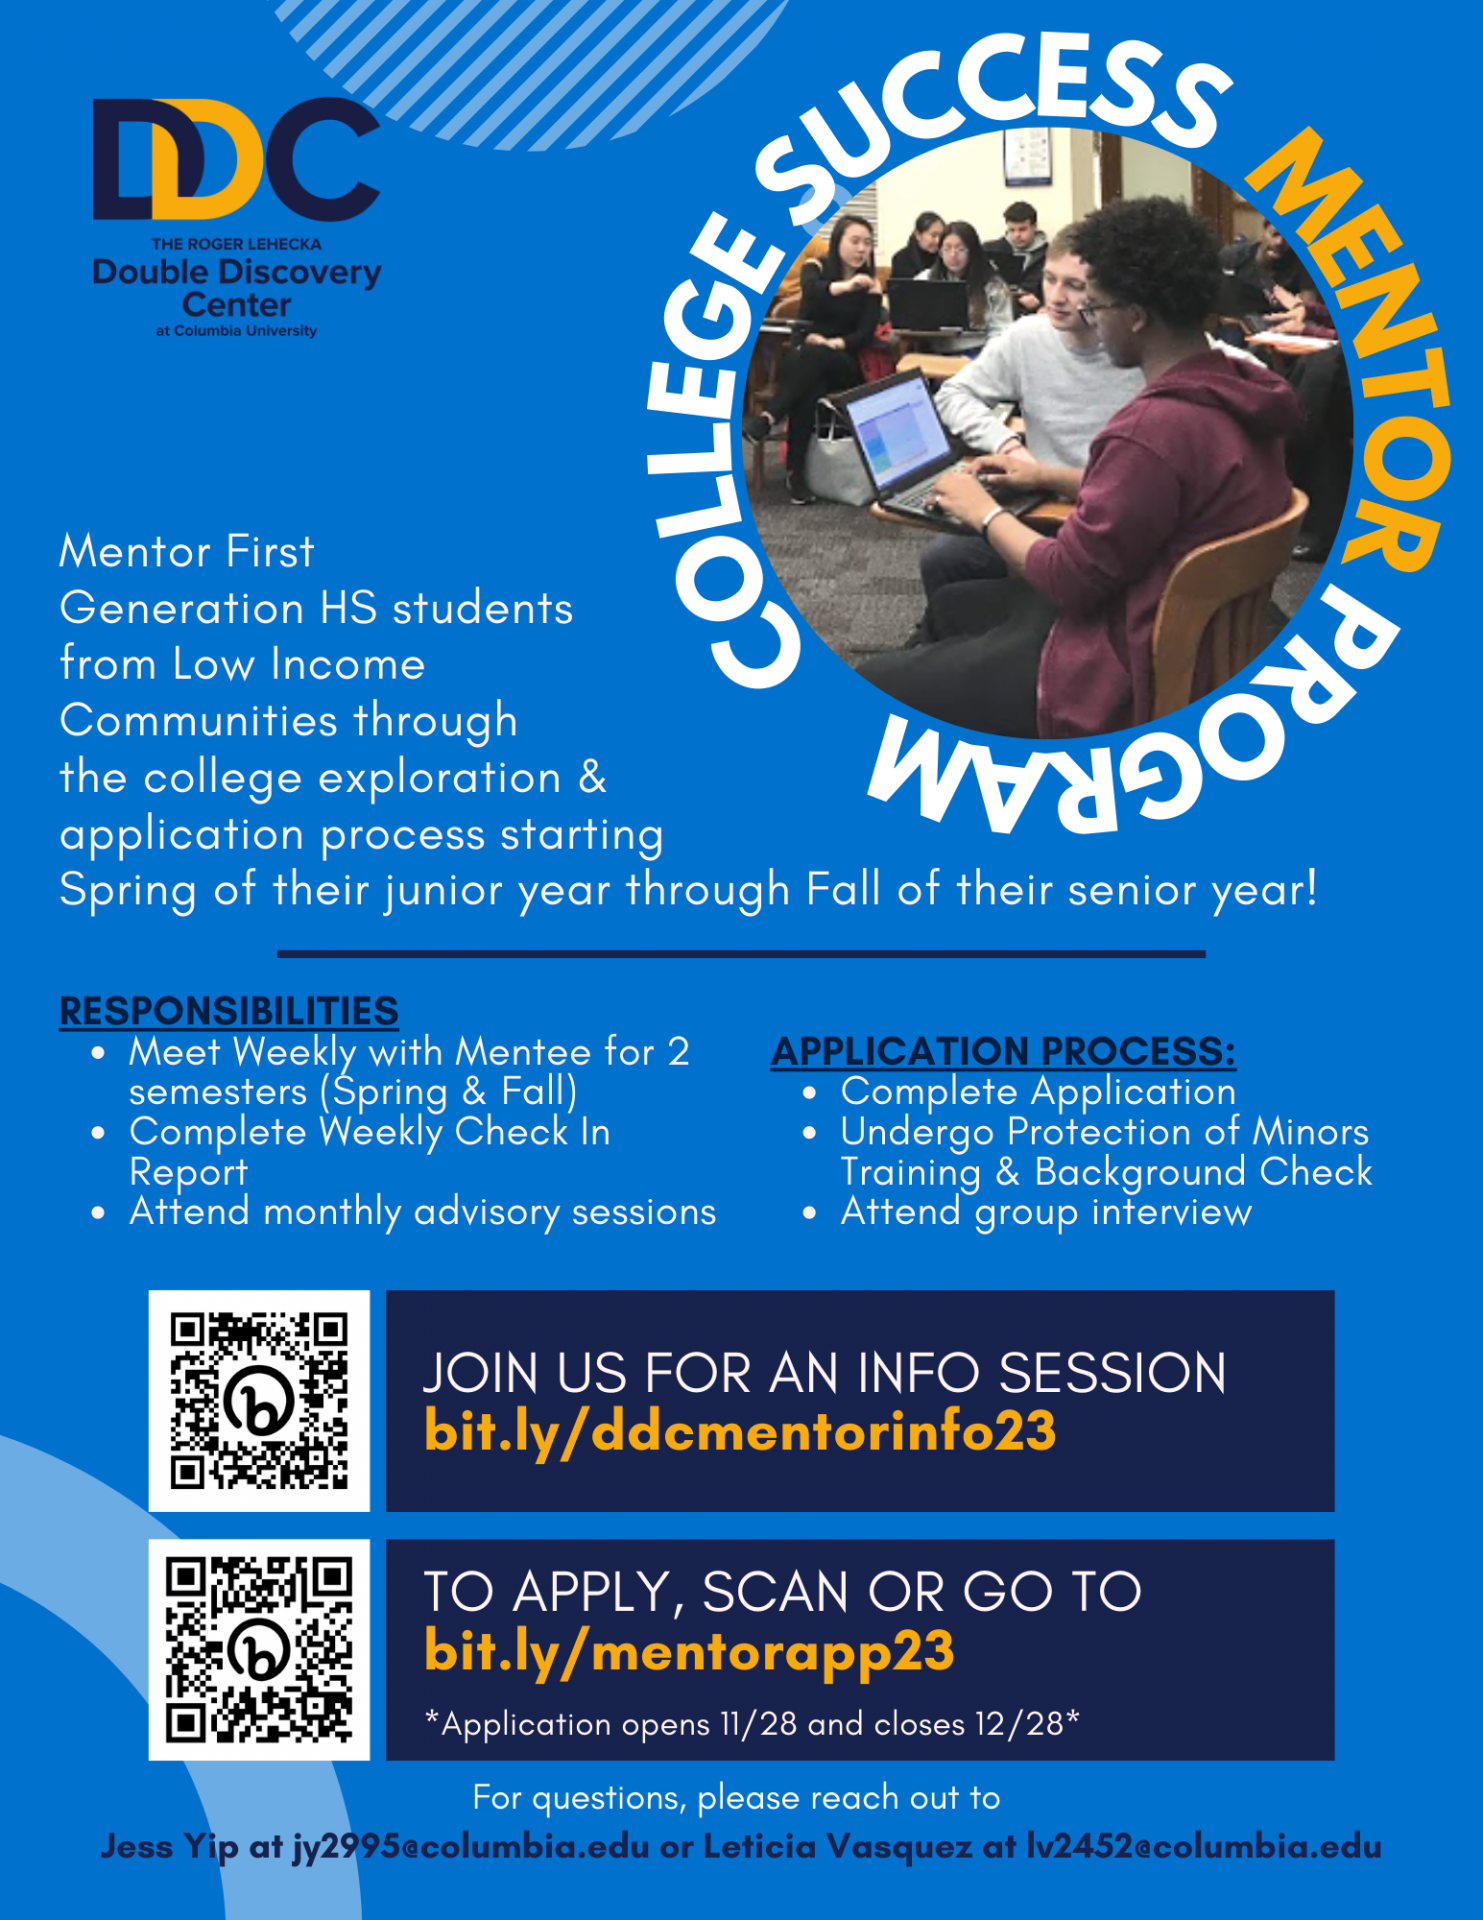 flyer with text that reads: Mentor first generation Hs students from low income communities through the college exploration and application process starting spring of their junior year through fall of their senior year! Responsibilities include: meet weekly with mentee for 2 semesters (spring and fall); complete weekly check in report; attend monthly advisory sessions. Application process: complete application; undergo protection of minors training and background check; attend group interview. Join us!